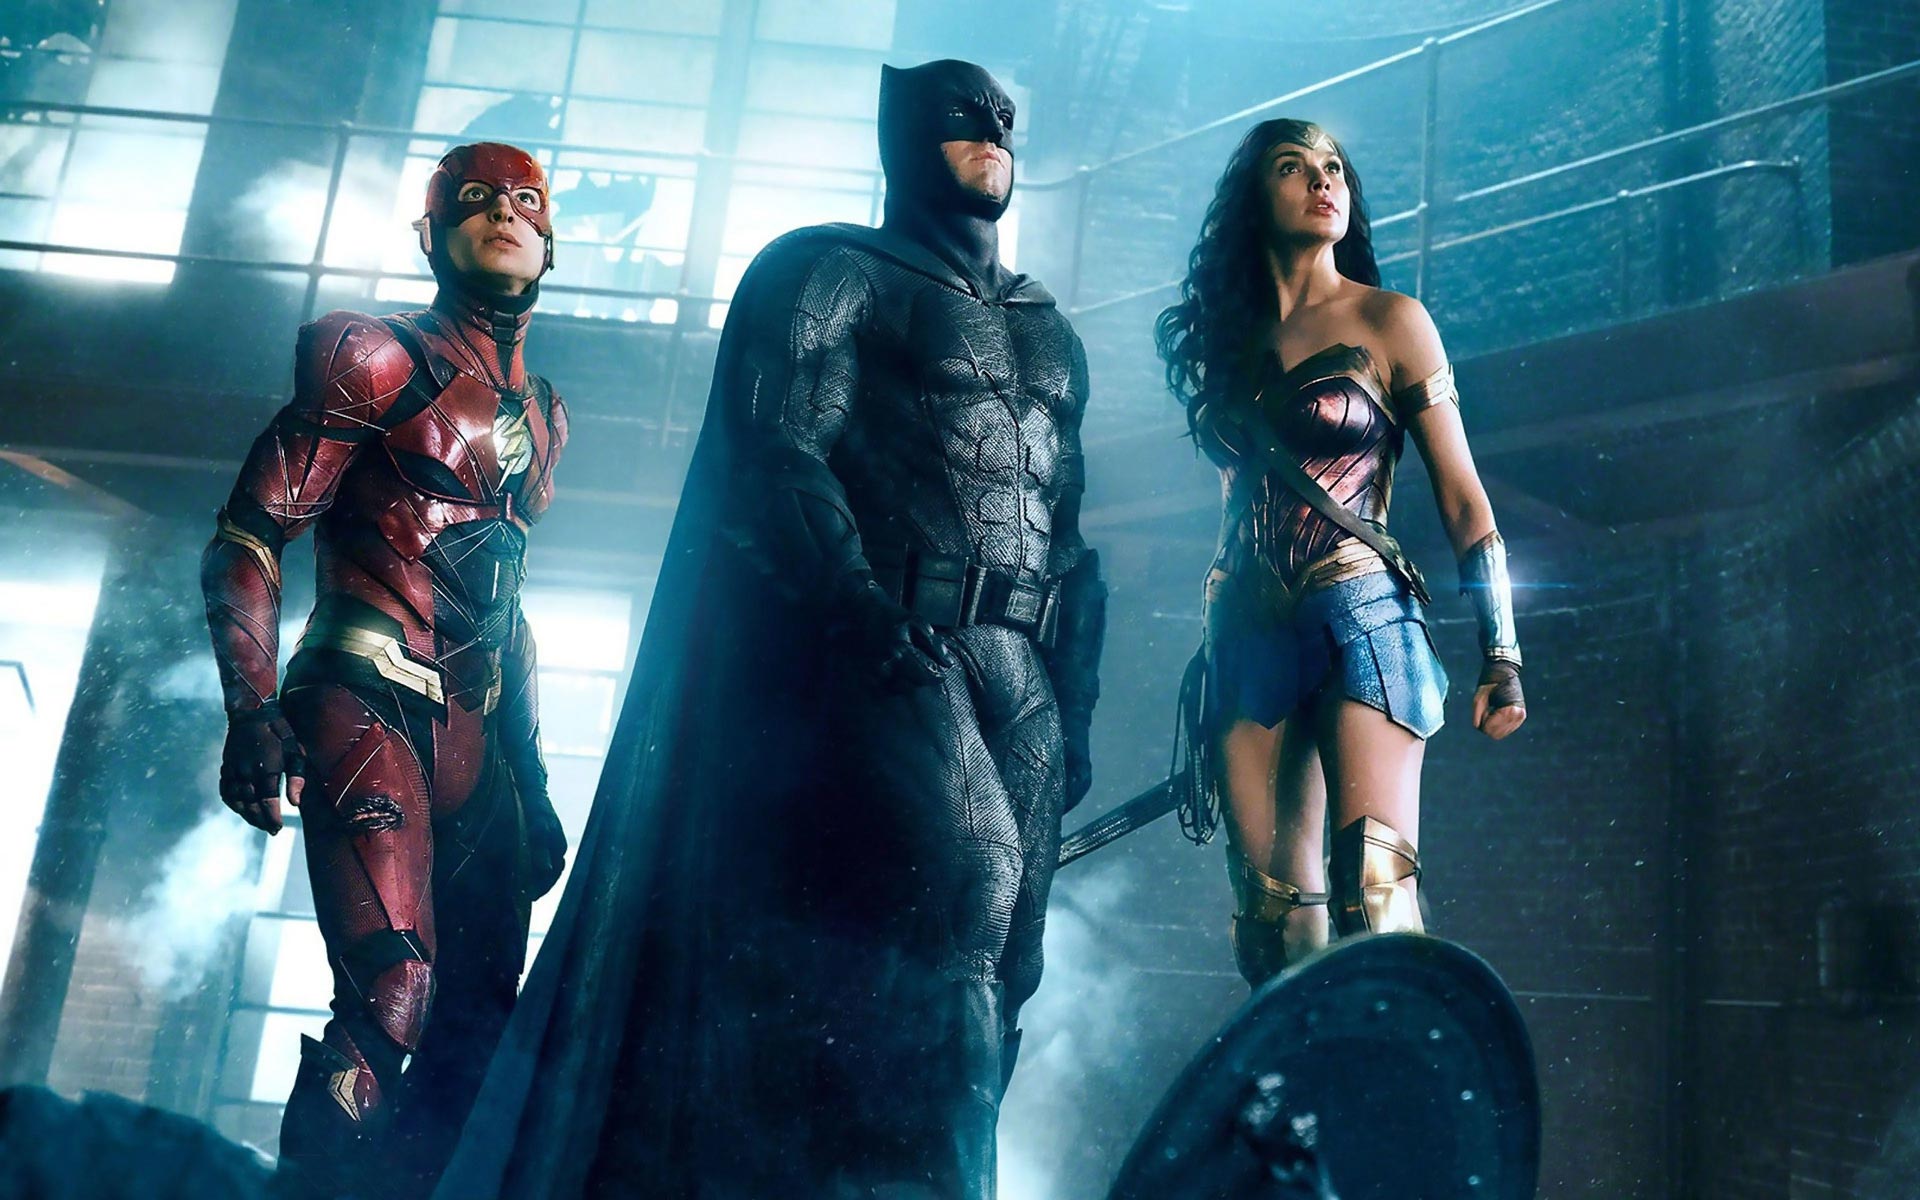 Justice League: the core of the DC Extended Universe